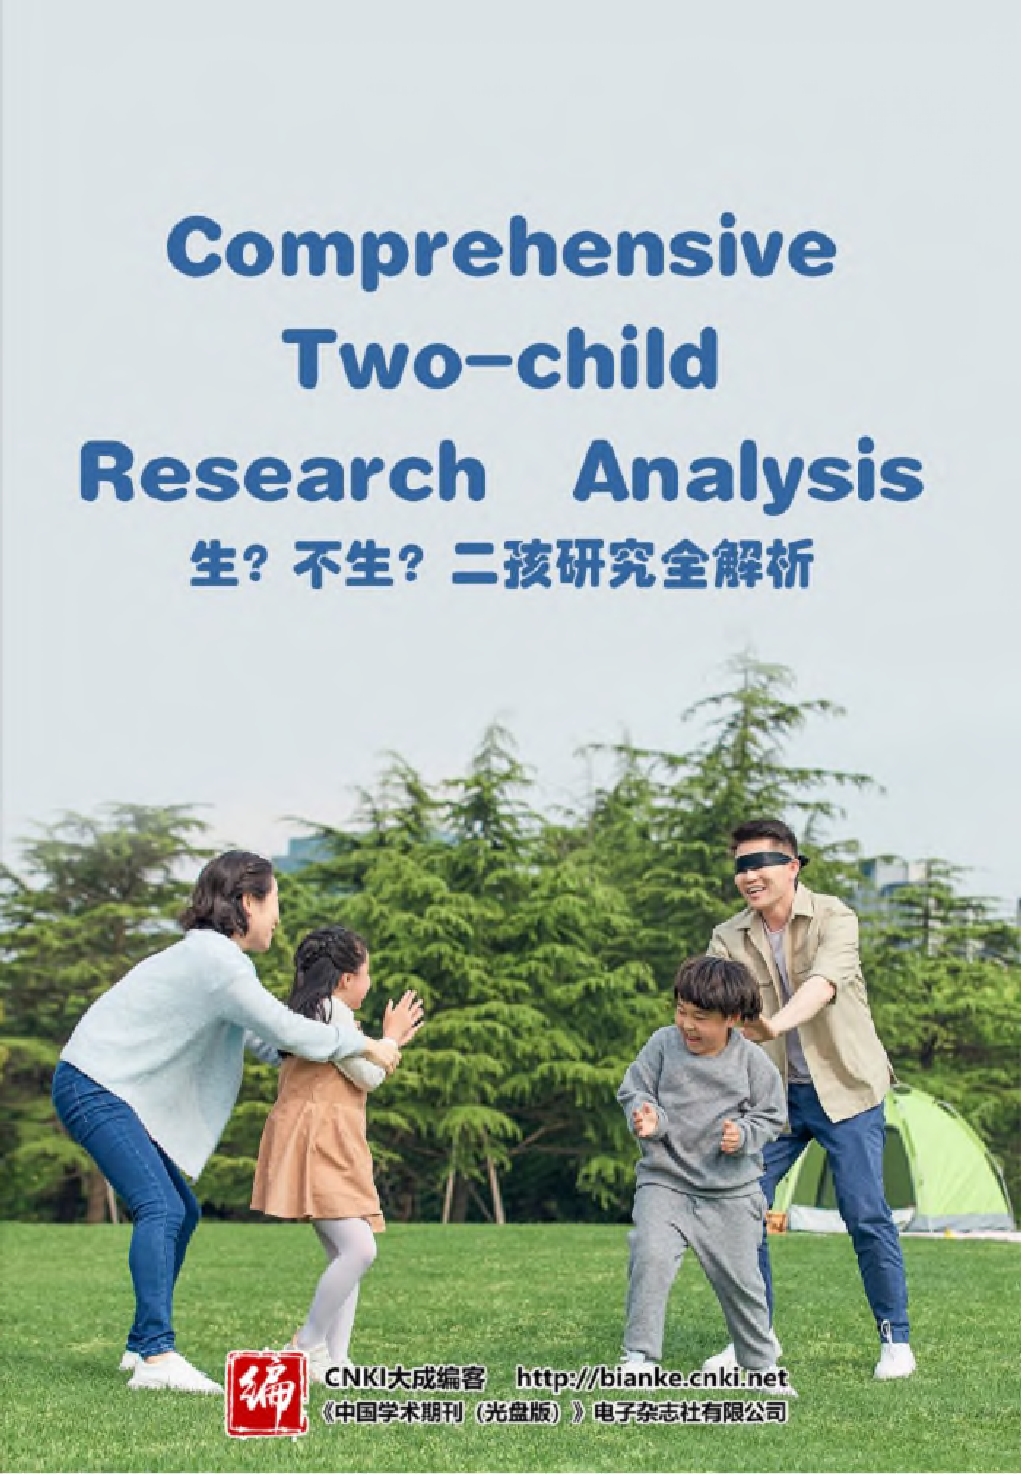 Comprehensive Two-child Research Analysis